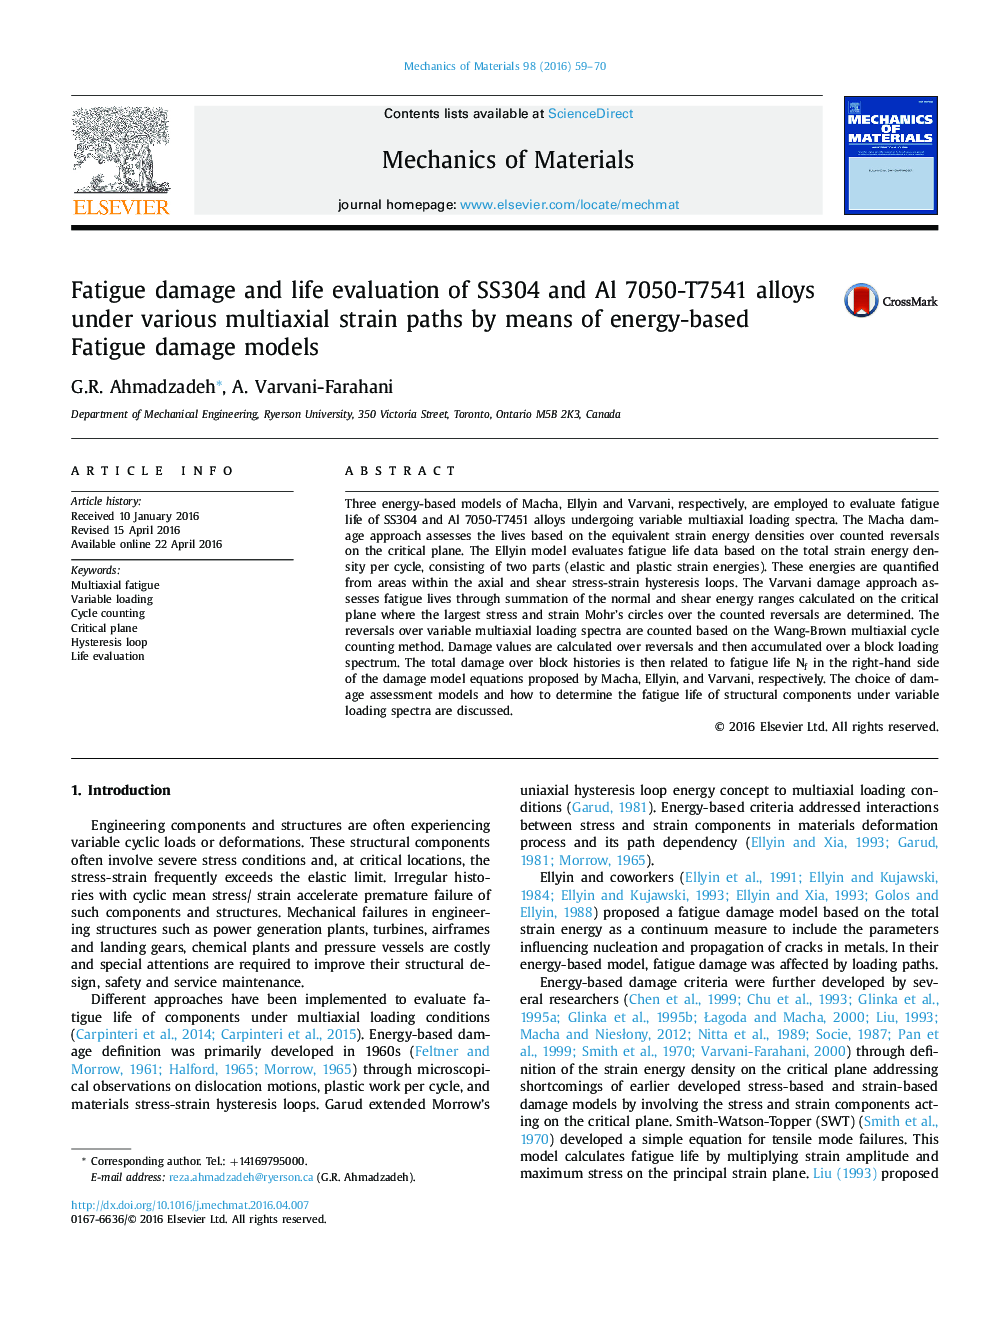 Fatigue damage and life evaluation of SS304 and Al 7050-T7541 alloys under various multiaxial strain paths by means of energy-based Fatigue damage models